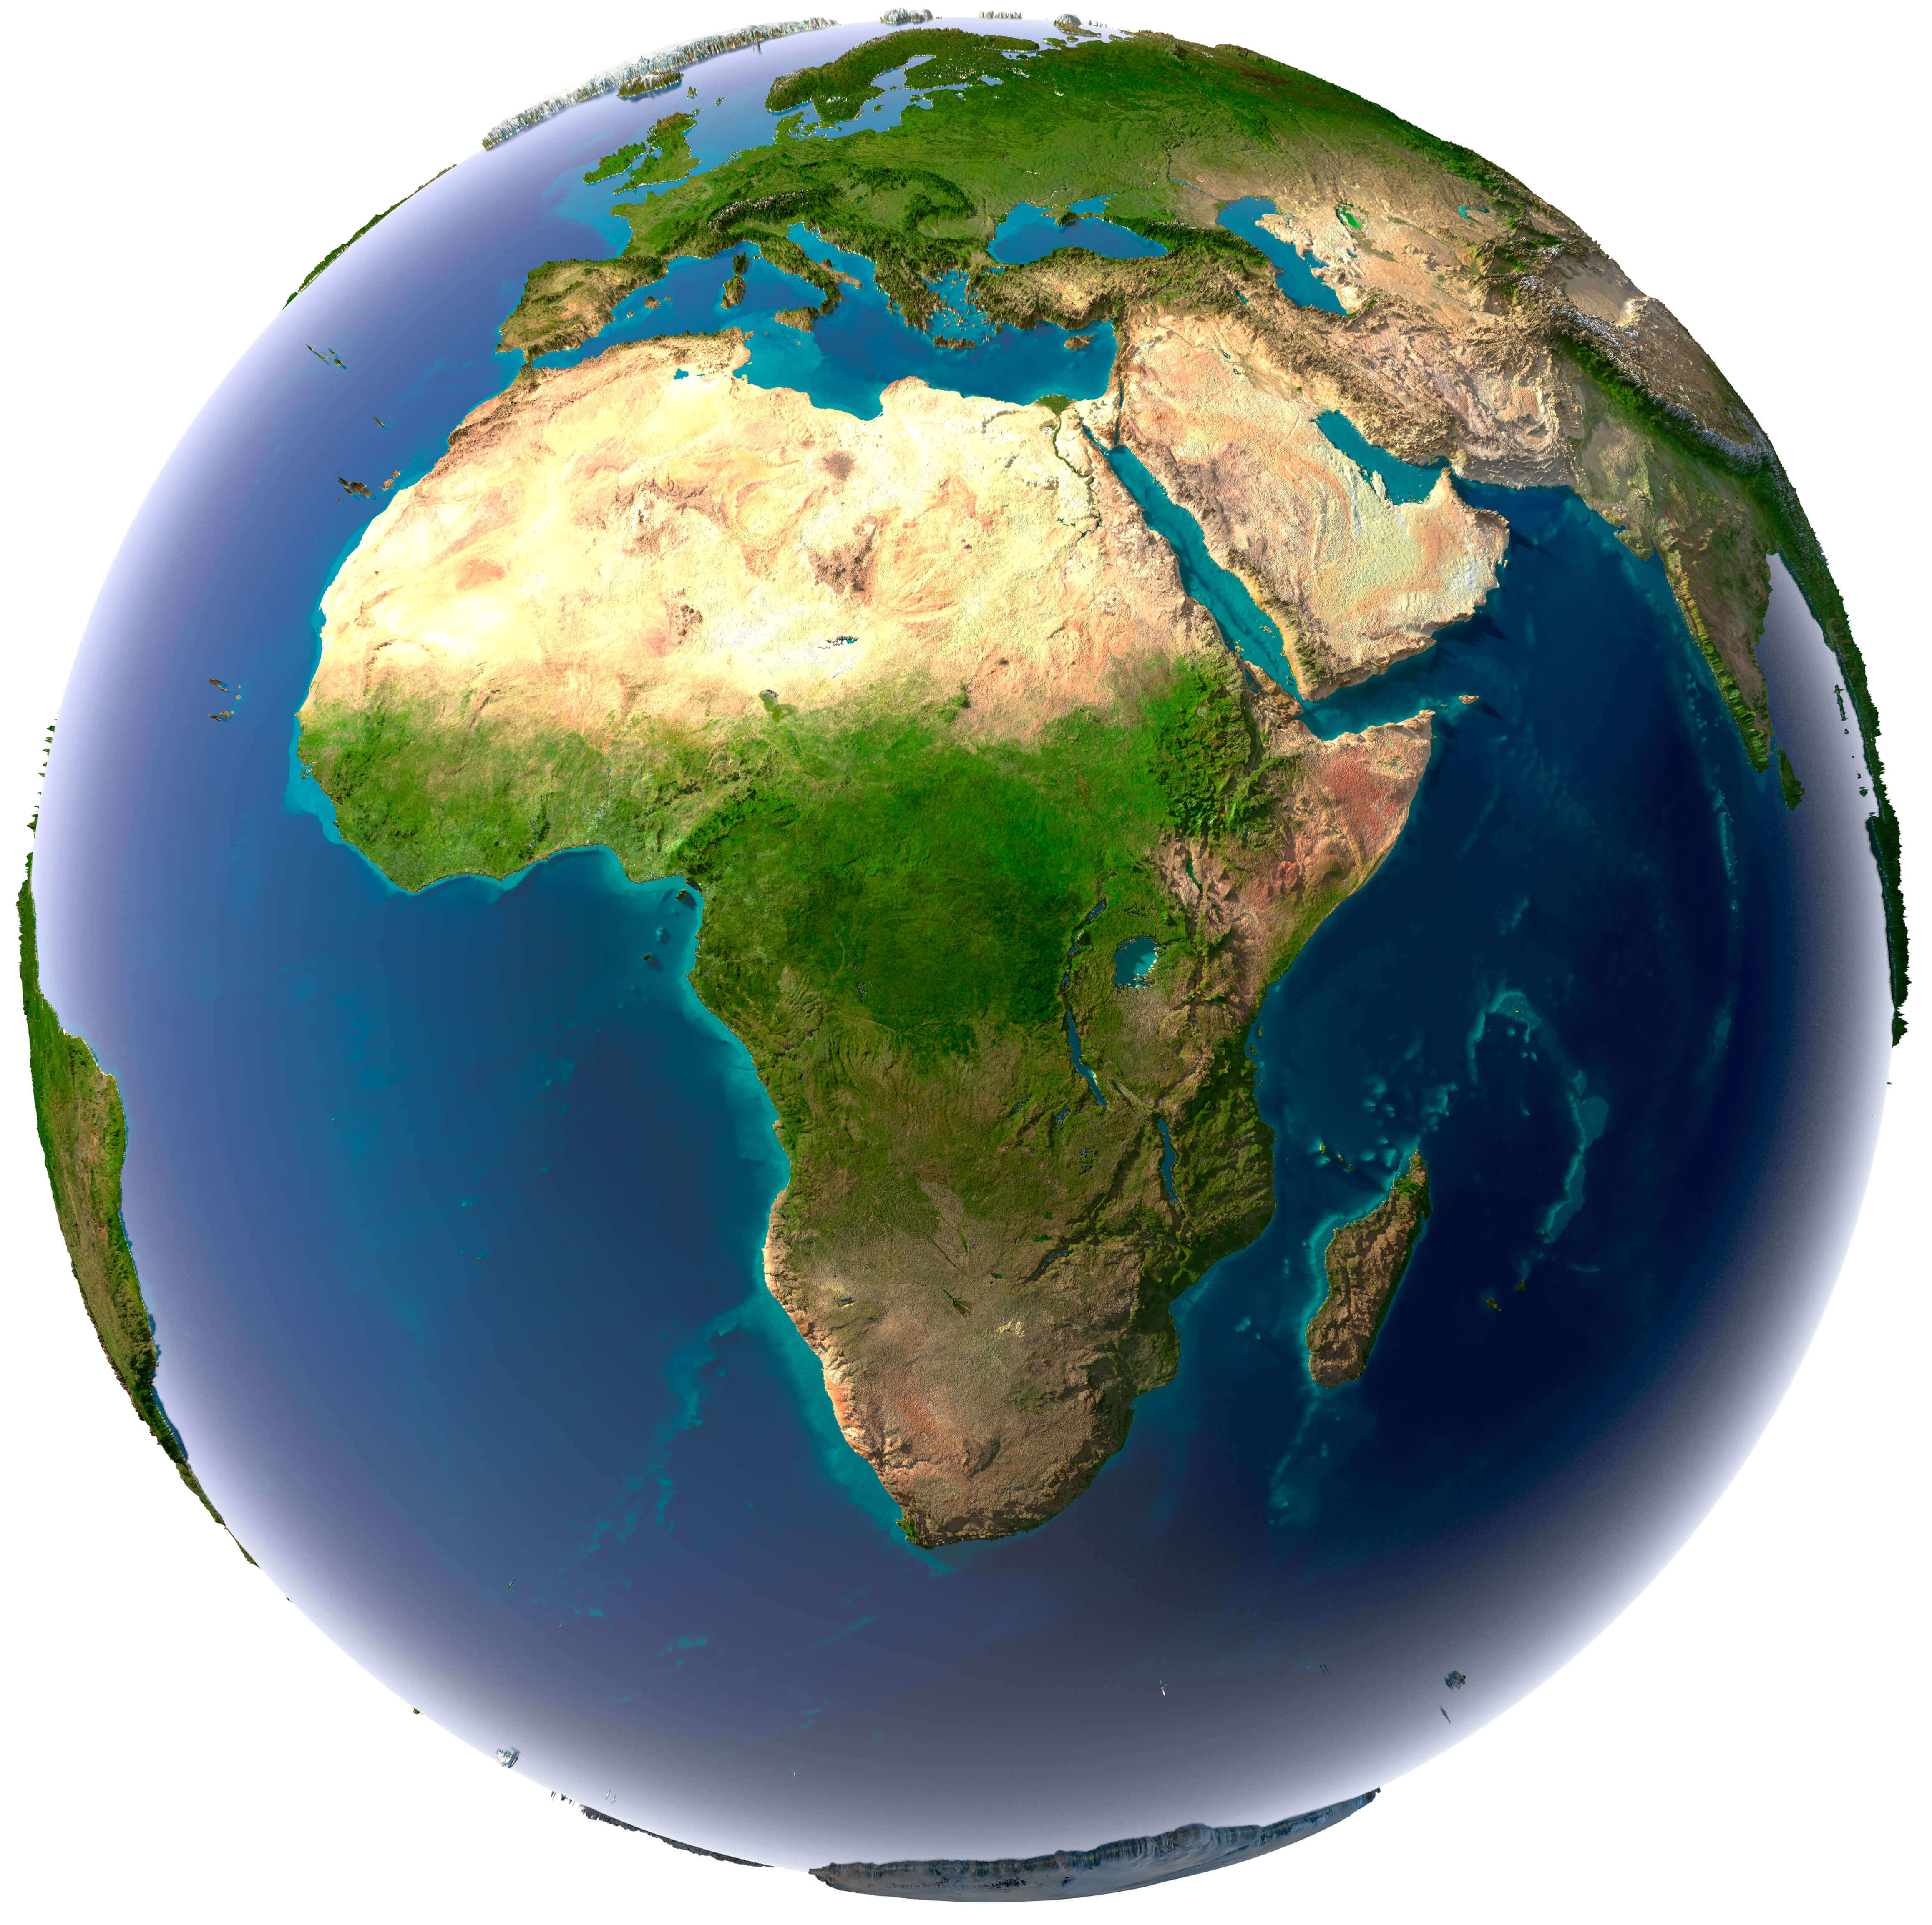 Africa Detailed Topography of Continents